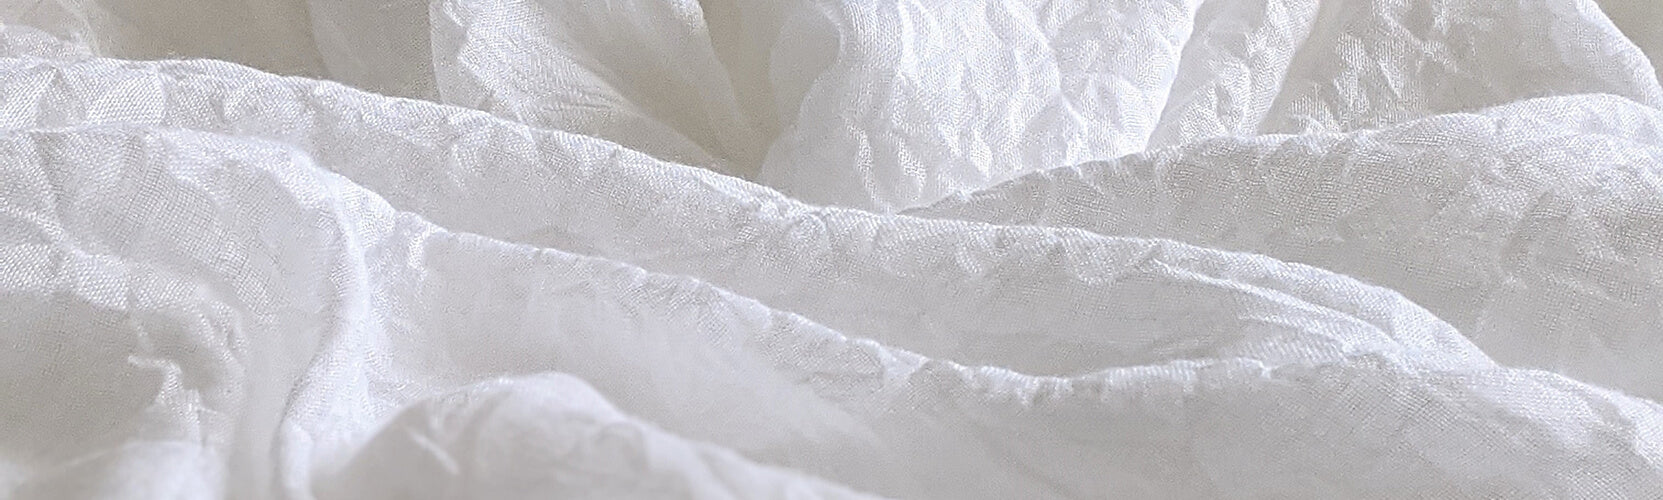 Closeup of White Bedsheets that Look Like Waves